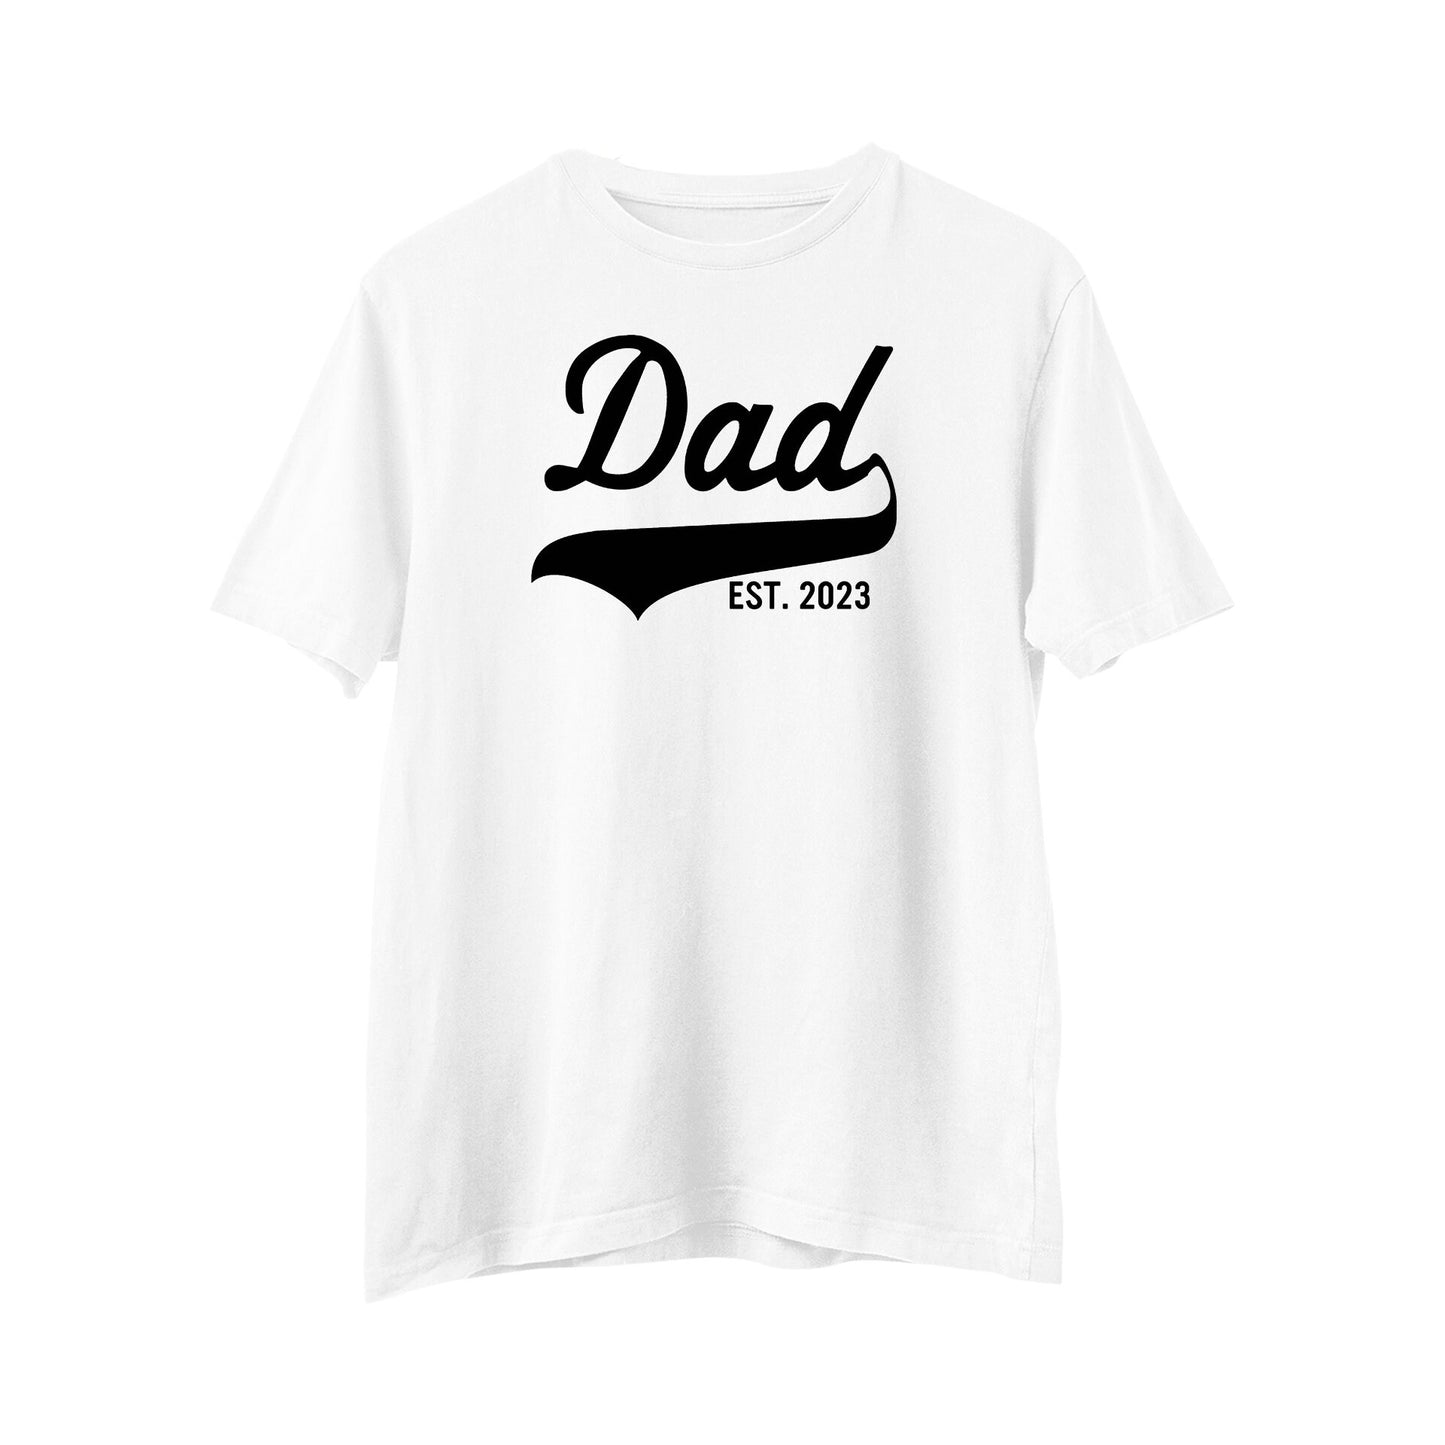 Personalised Dad T-shirt, Men's T-shirt, Daddy T-shirt, Father's Day Gift, Men's Birthday Gift, Father's Day Shirt, Novelty t-shirt